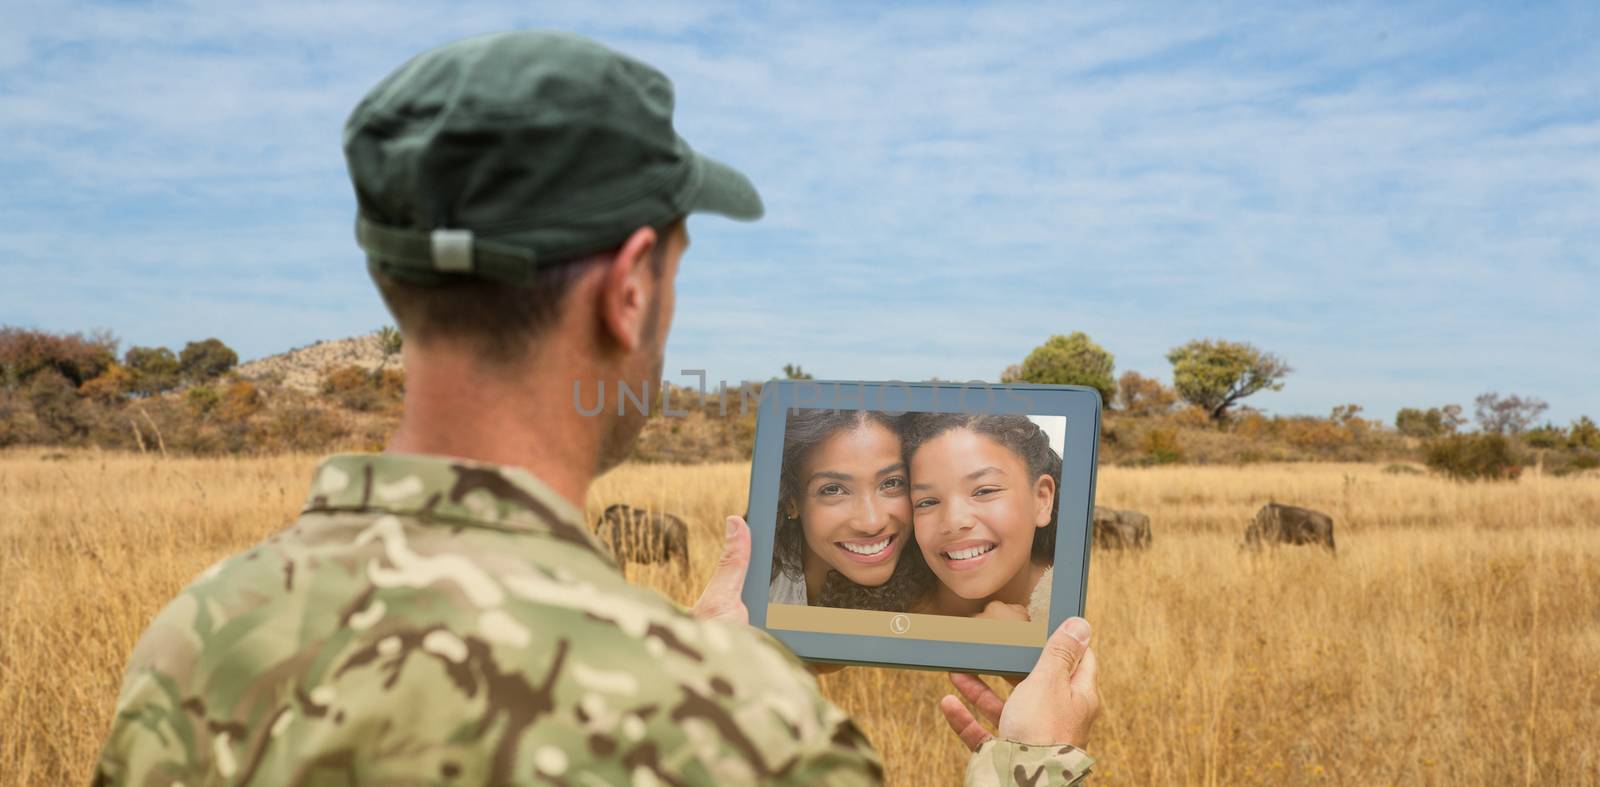 Composite image of soldier using tablet pc by Wavebreakmedia